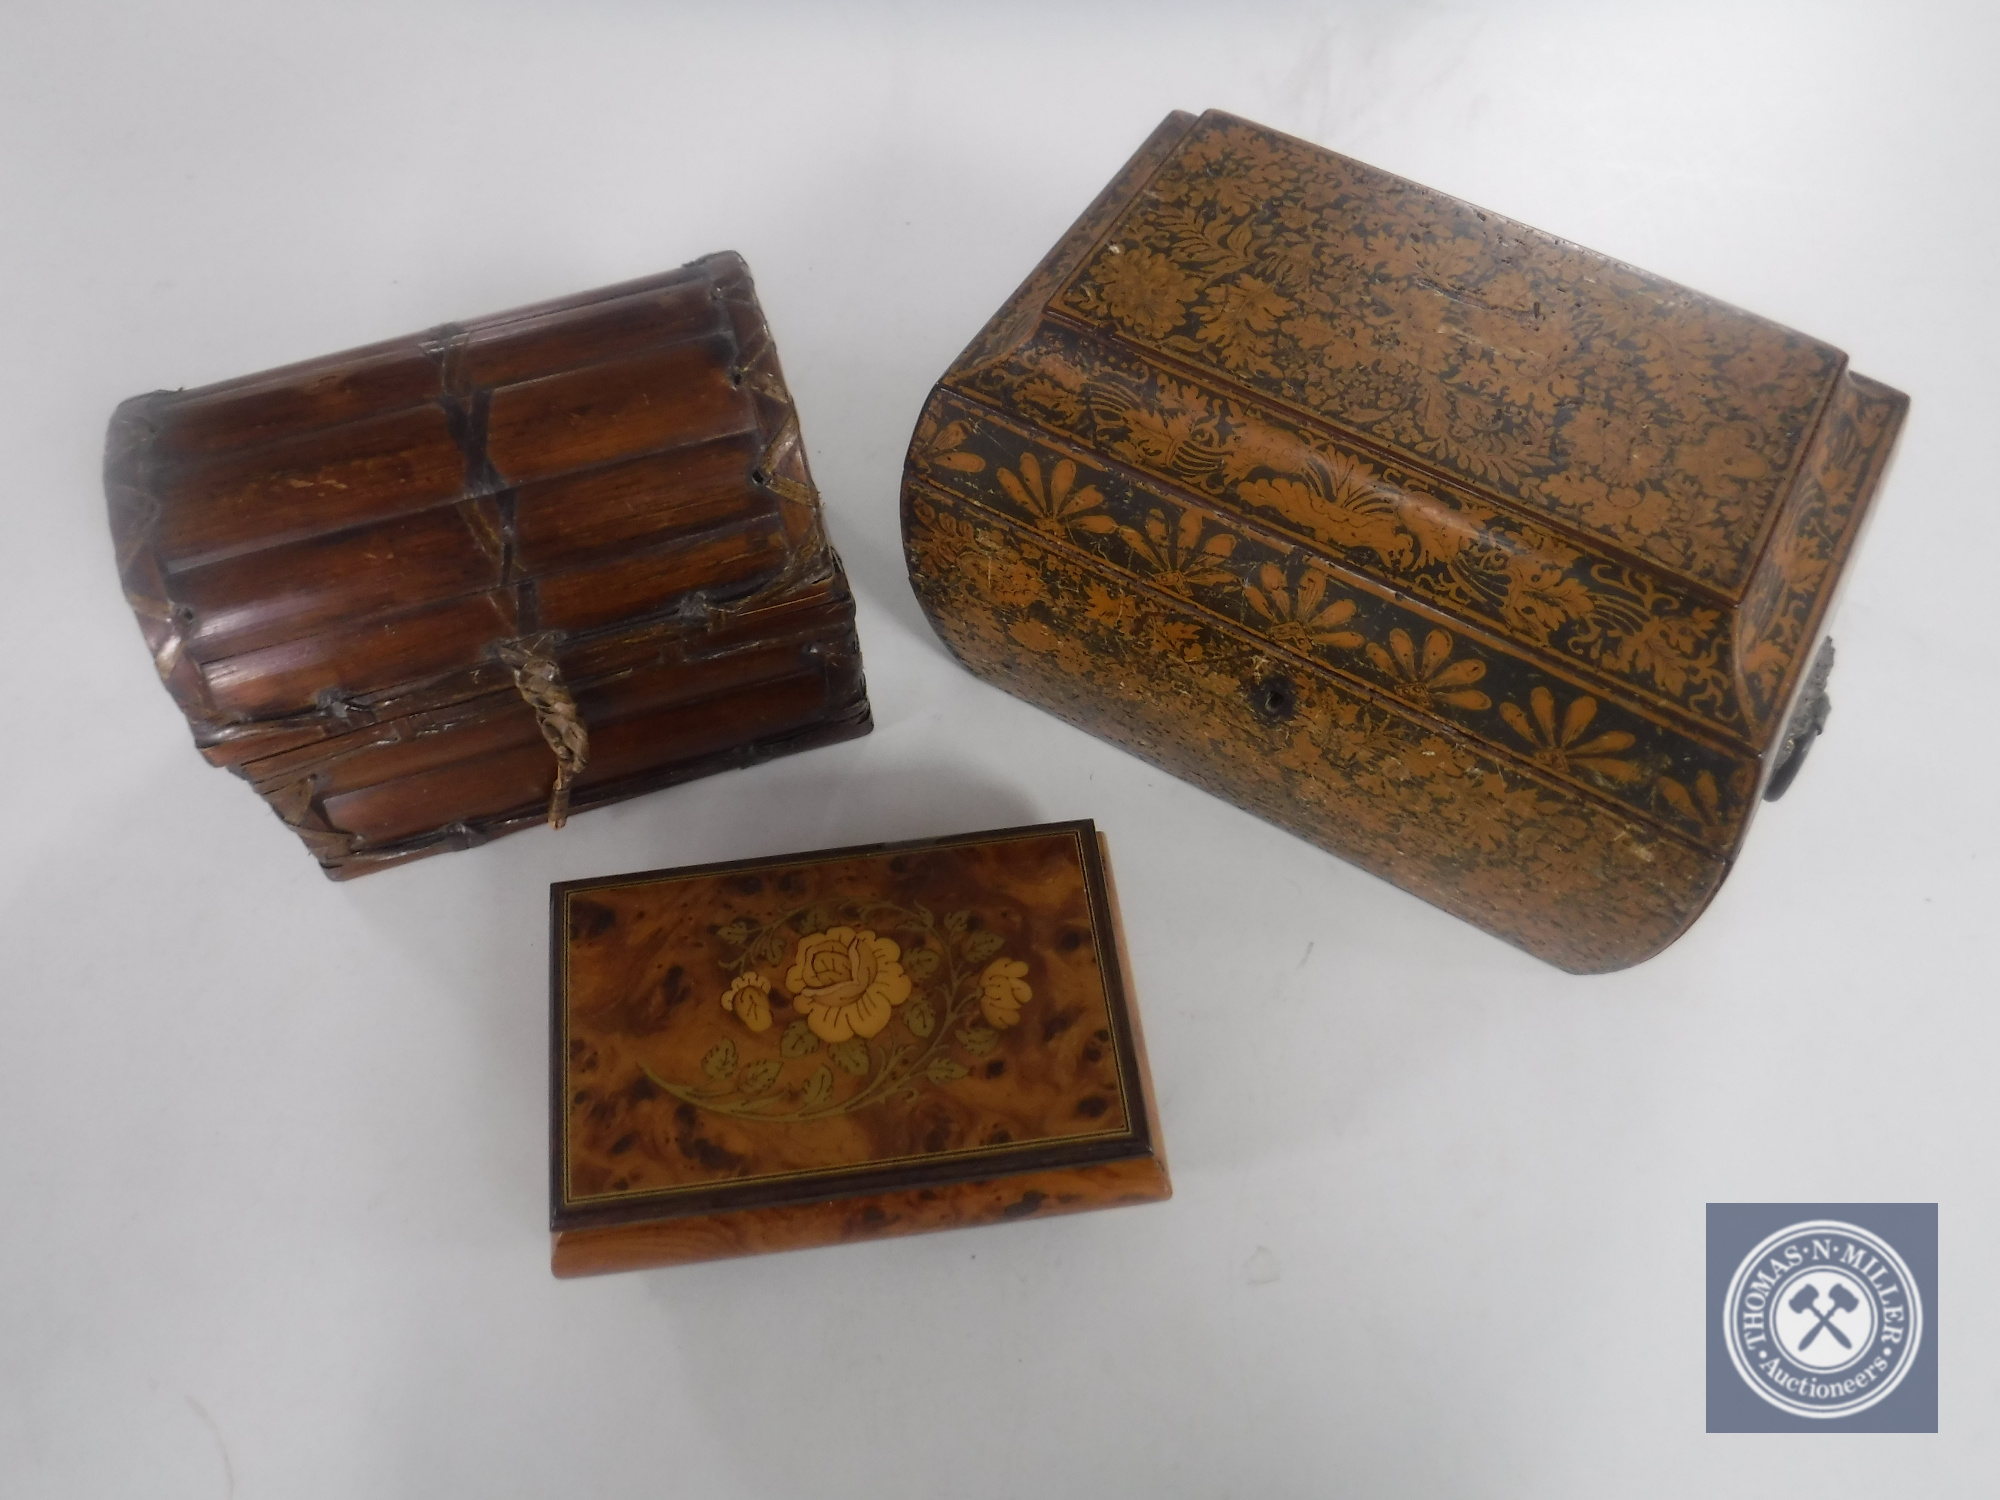 An early 20th century tea caddy and two trinket boxes